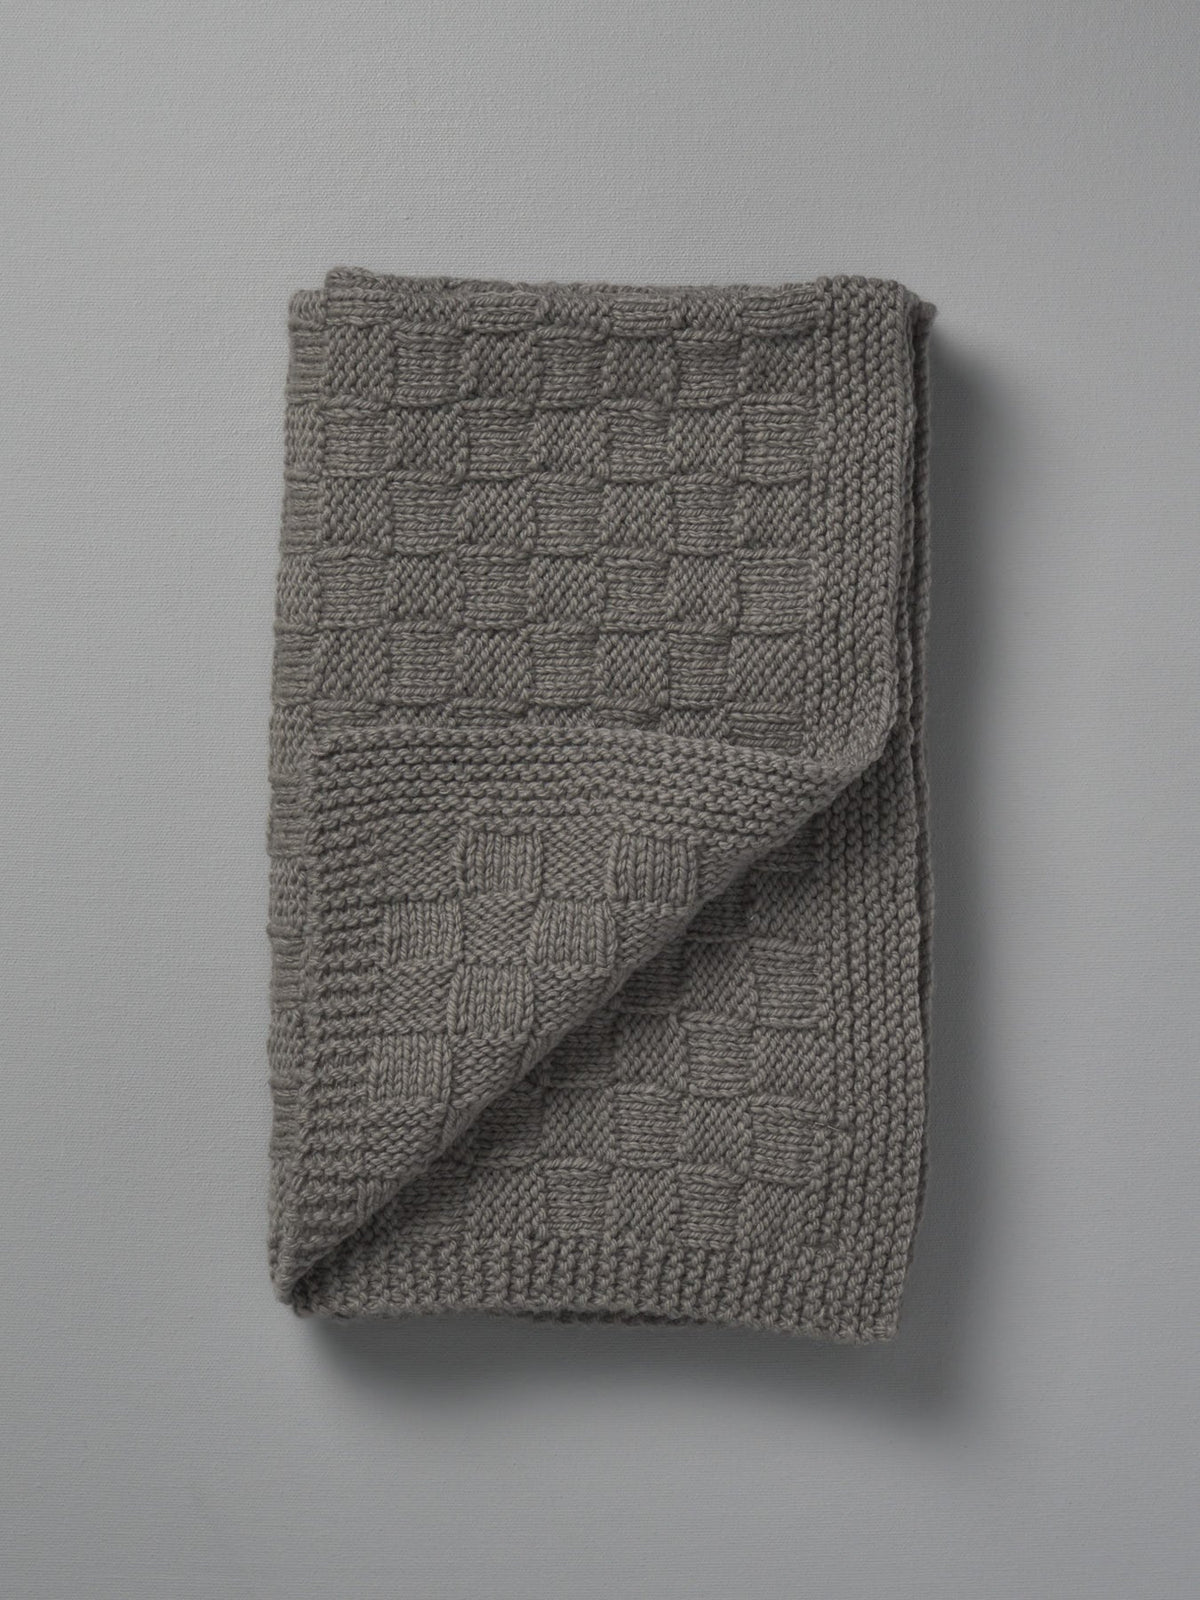 A grey Weebits Hand Knitted Travel Rug - Mushroom on a grey background.